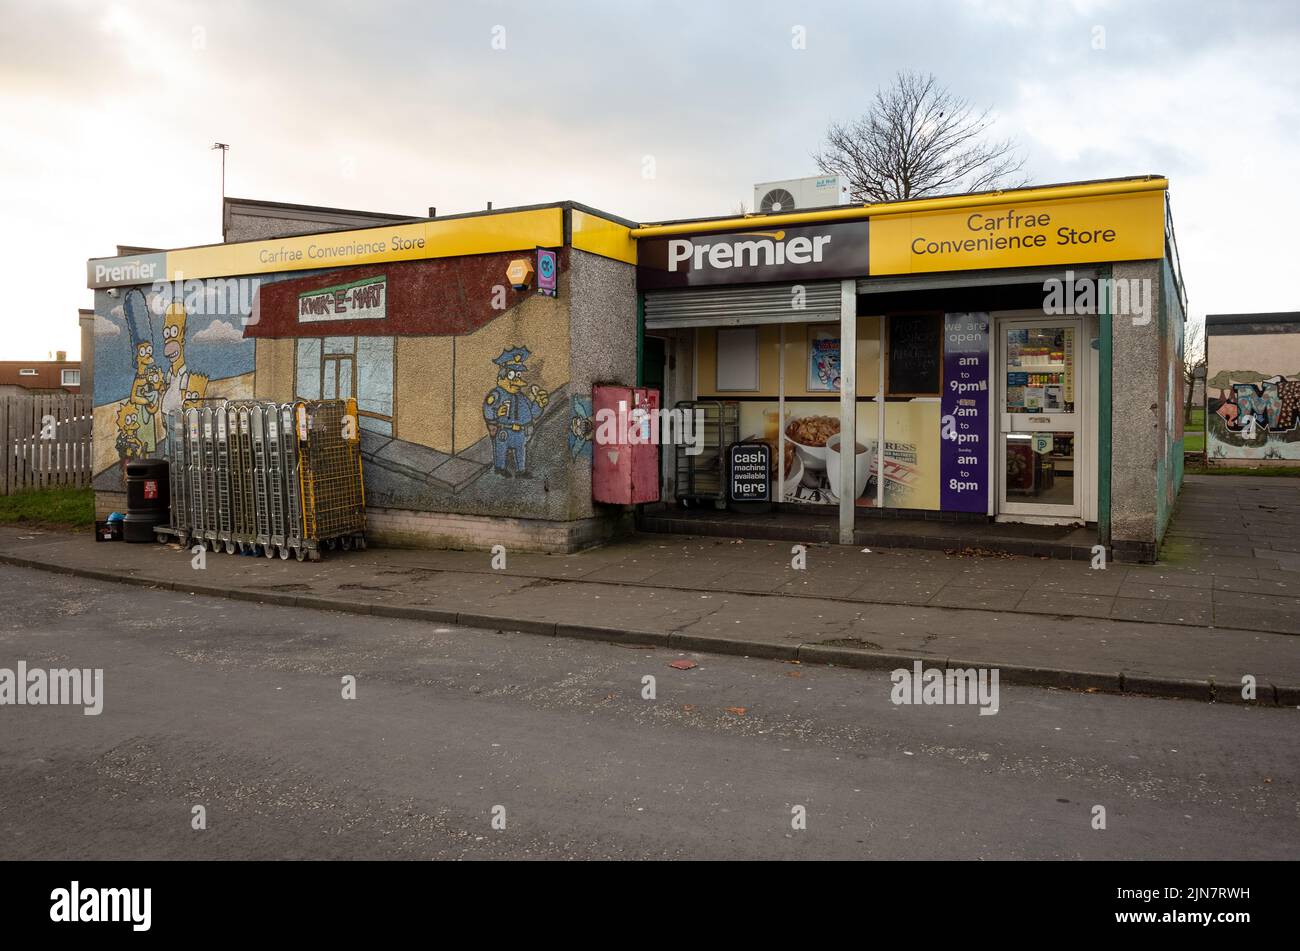 Carfae Convenience Store in Macedonia area, Glenrothes, Fife, Scotland, UK. Stock Photo